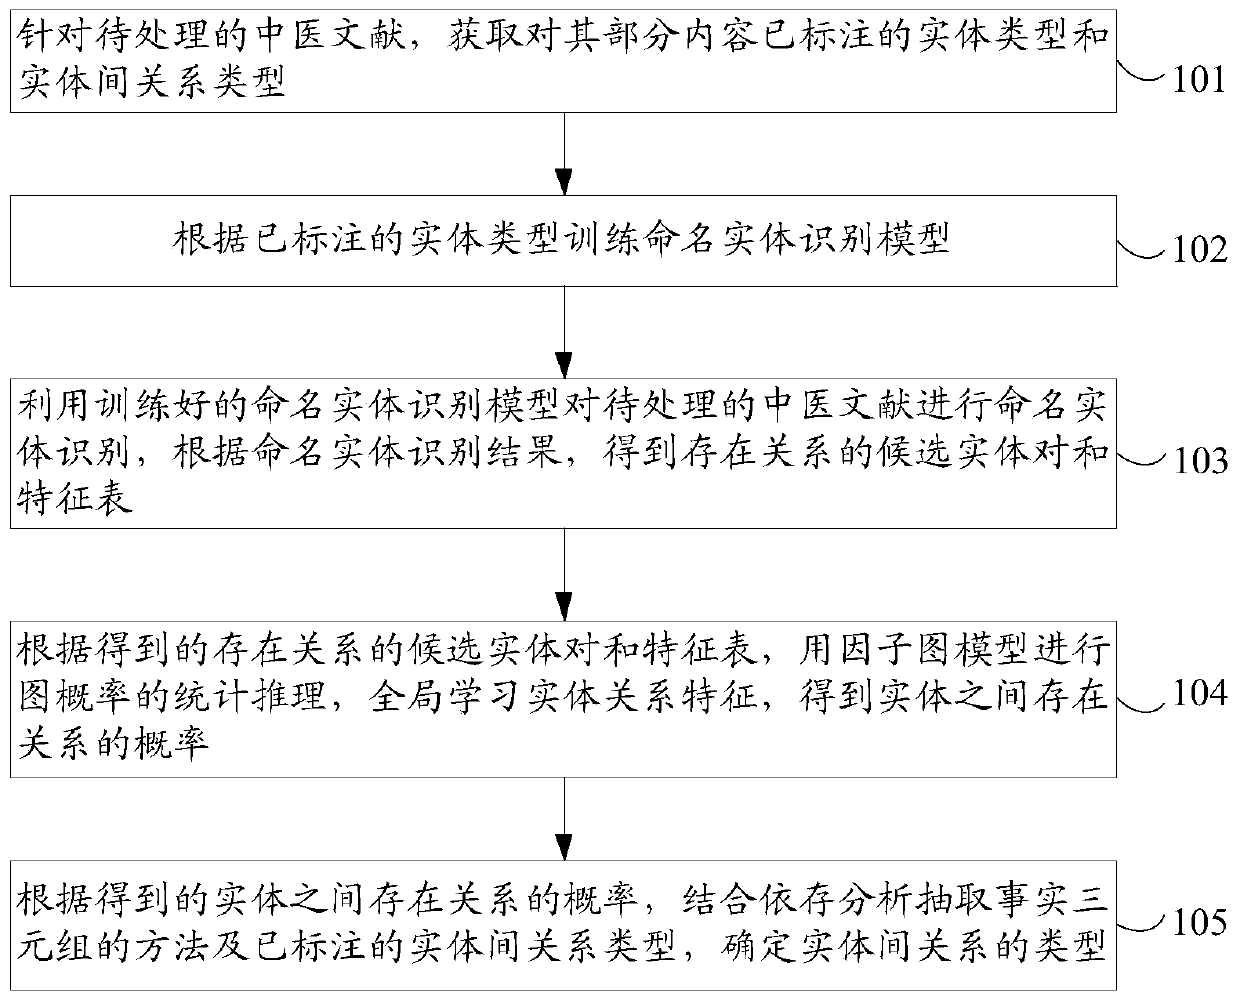 Method and device for extracting relationships among entities in traditional Chinese medicine documents